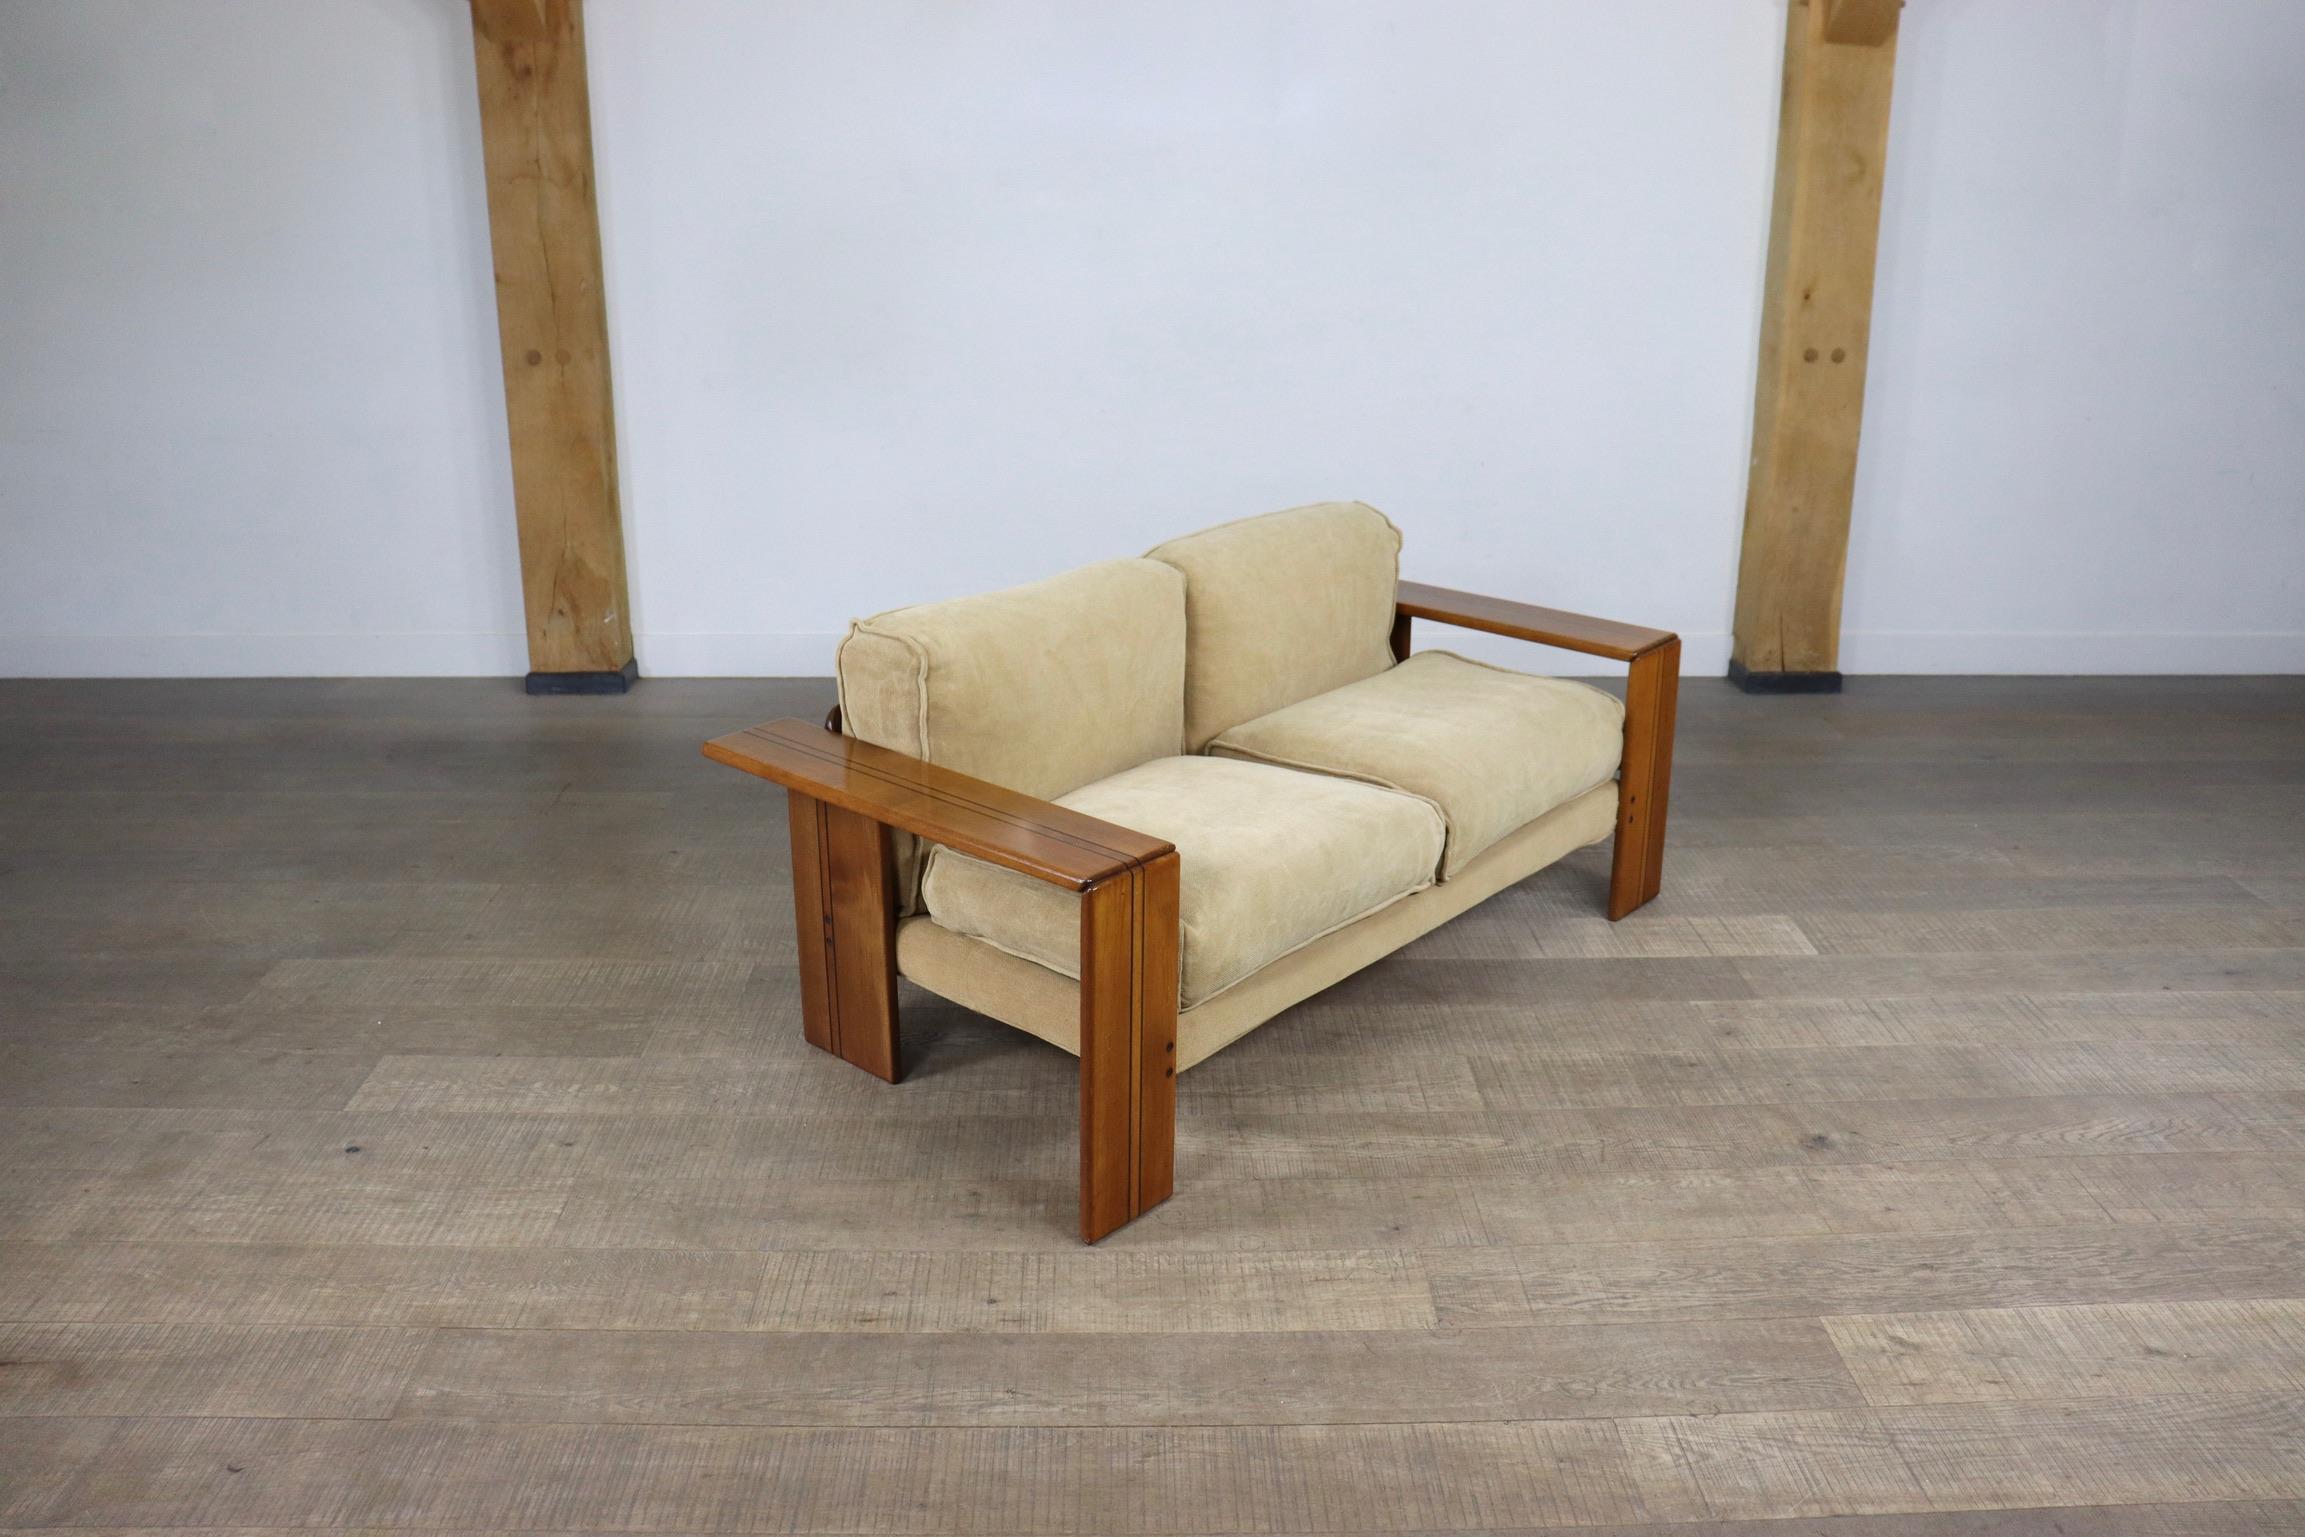 Beautiful Afra & Tobia Scarpa for Maxalto, 'Artona' sofa, elm, Italy 1975 
This sofa shows absolute stunning craftsmanship. The absolute highlight of this incredible sofa is the woodworking. The elm is inlaid with dark lines of wood, which create